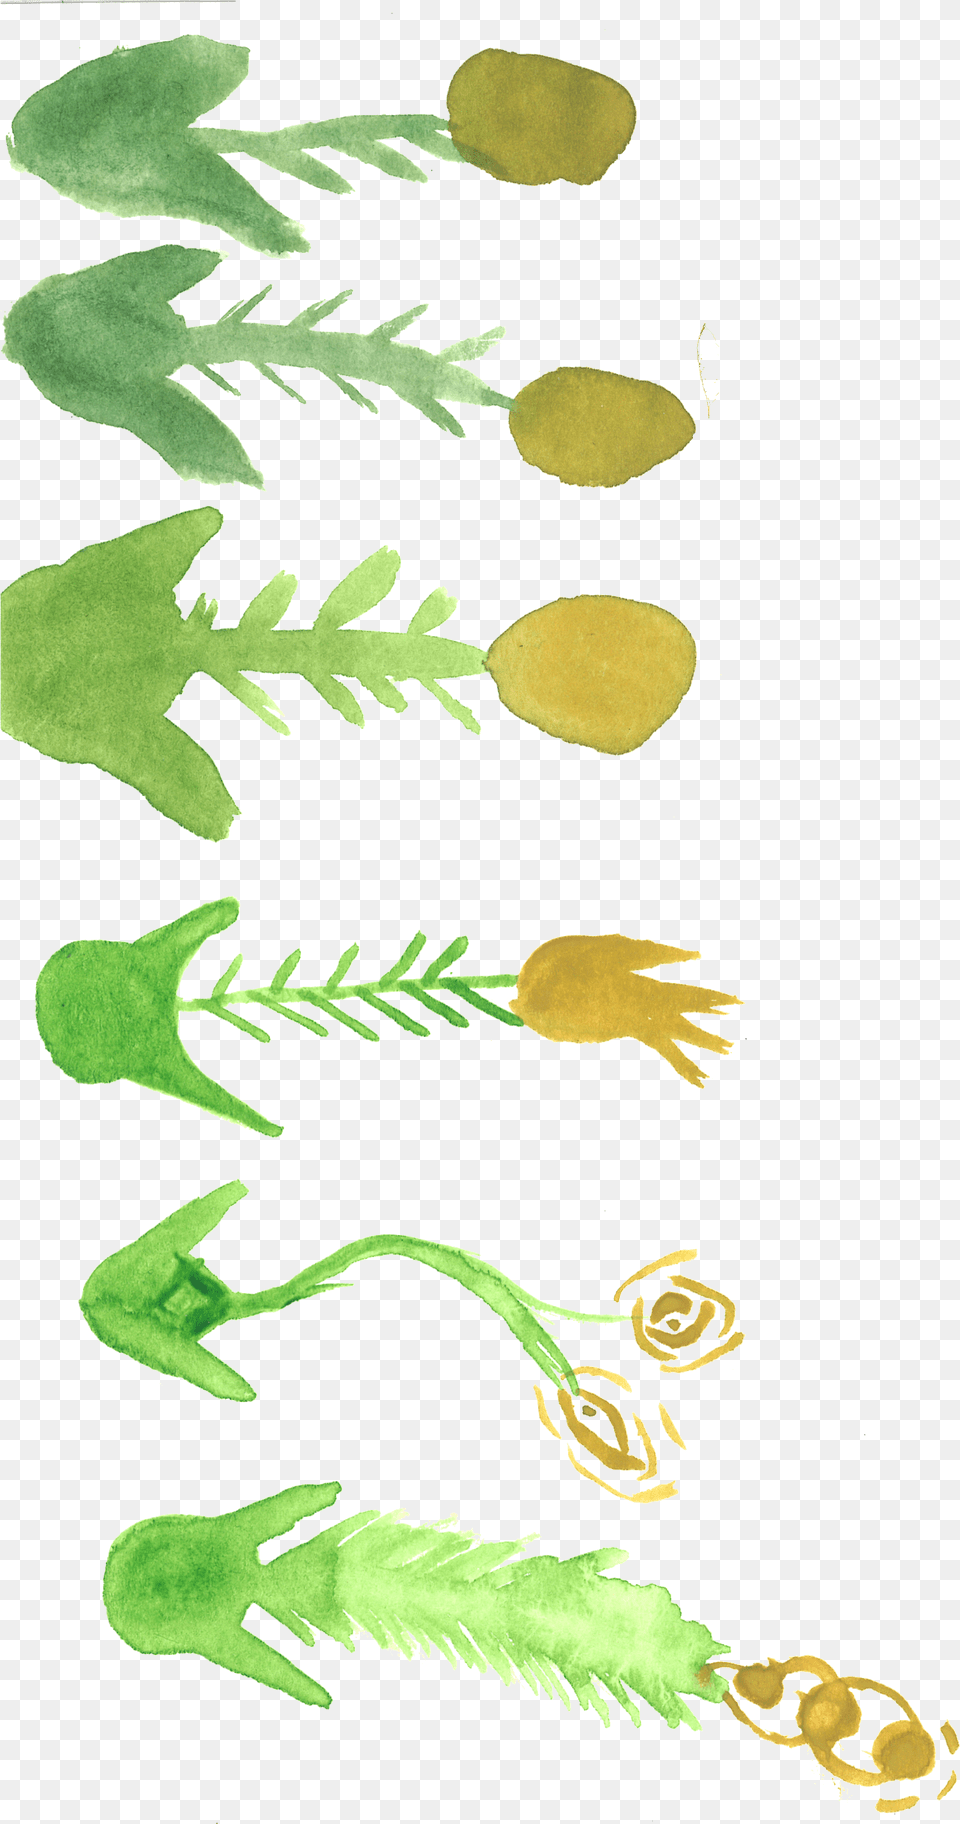 Watercolor Weirdness All Images Are Free For Personal Frog, Cutlery, Plant, Green, Leaf Png Image